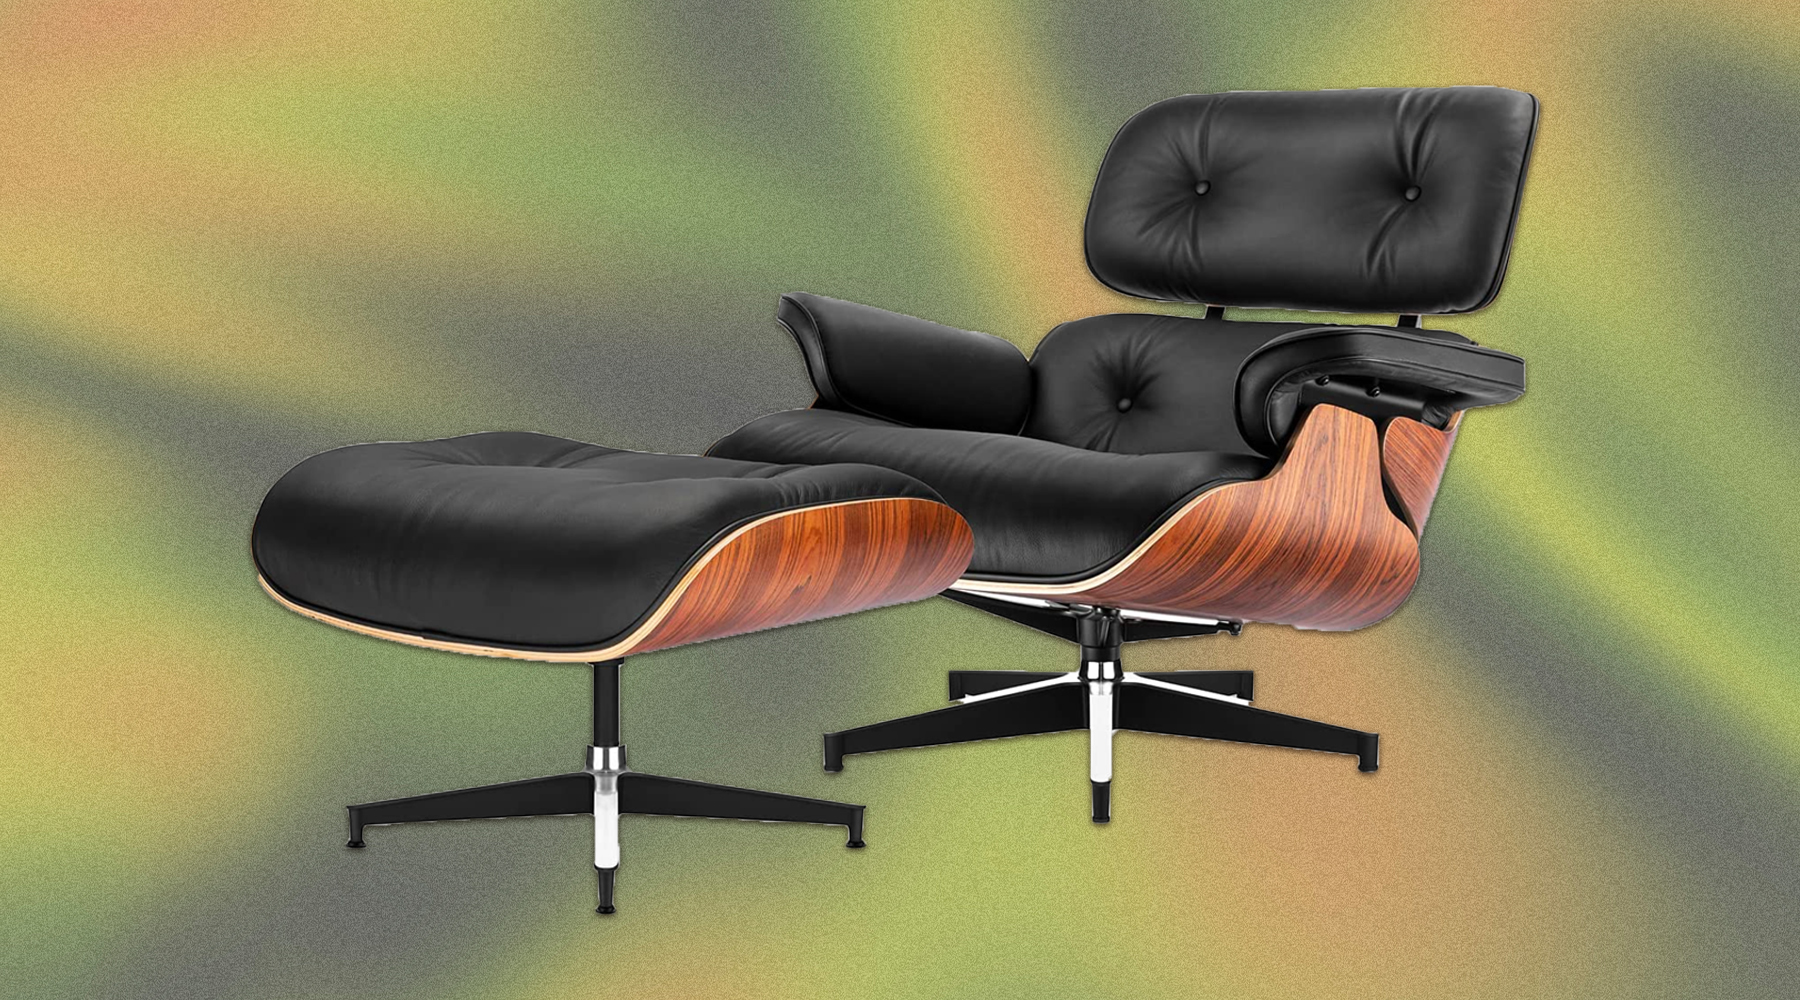 We Found a Half-Price Alternative to The Togo Lounge Chair